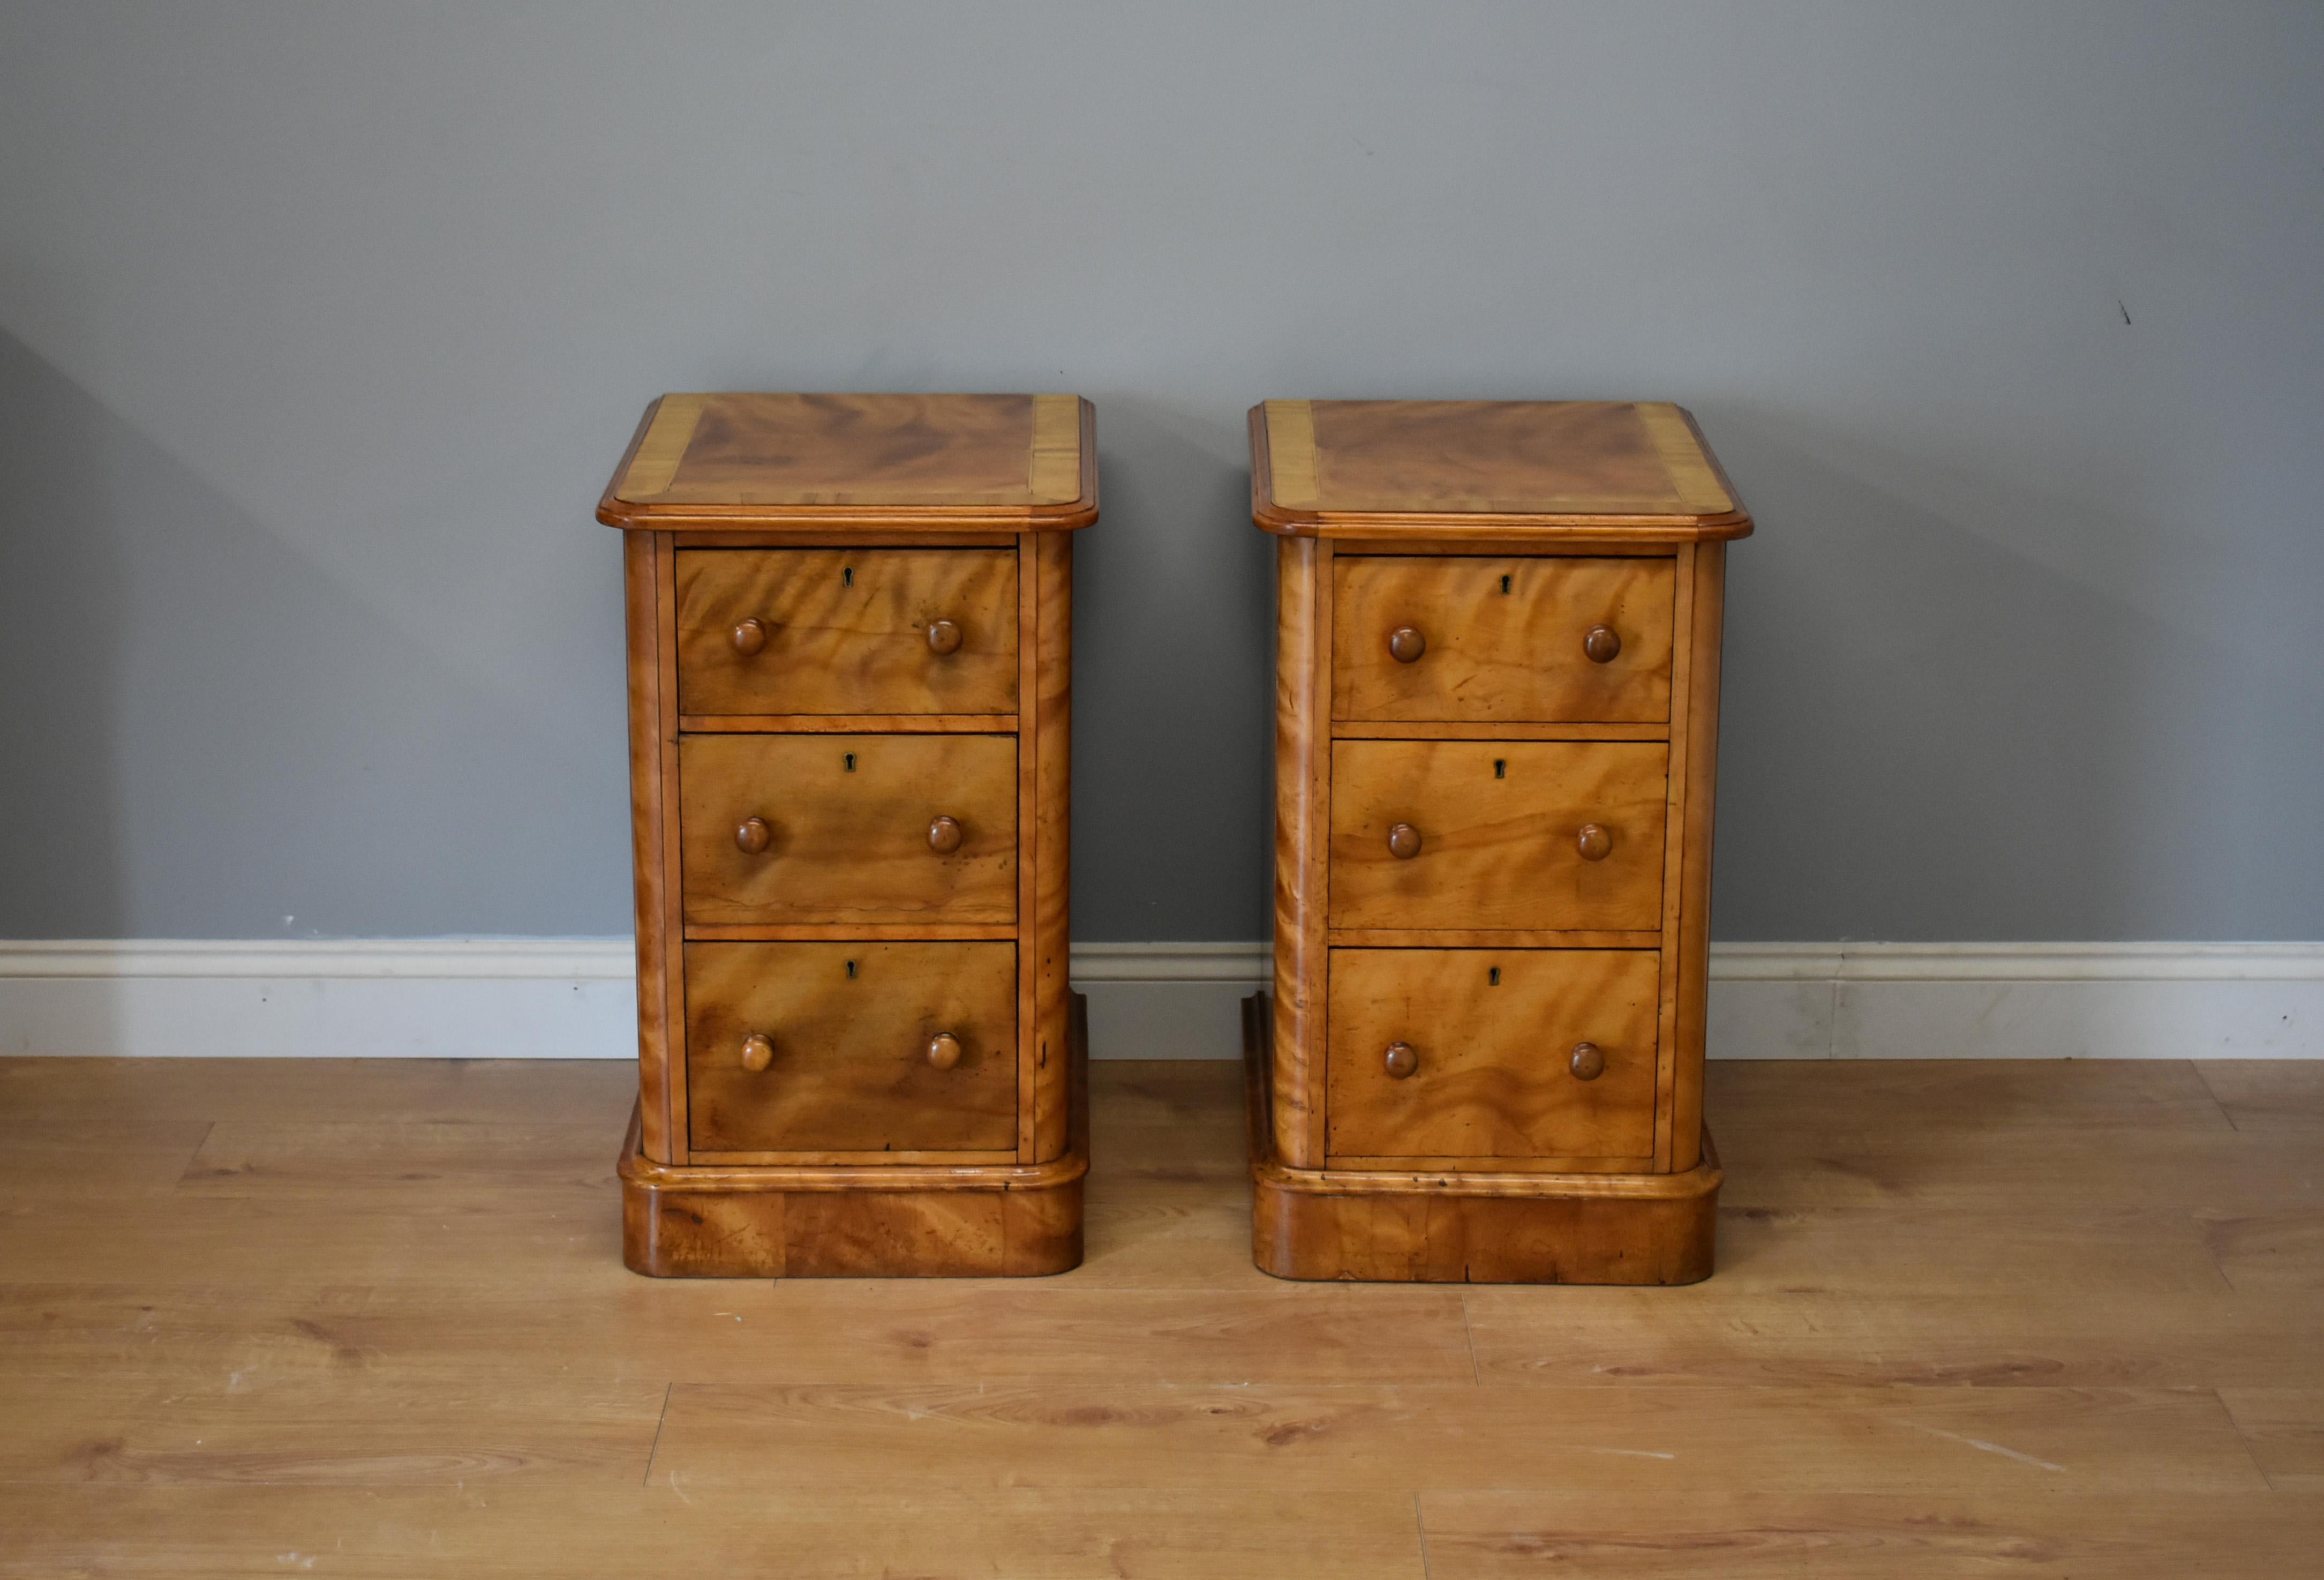 For sale is a good quality pair of Victorian satinwood bedside chests, each having banded tops over three drawers with turned handles, above a plinth base. Both of the chests are in superb condition. 

Measures: Width 17